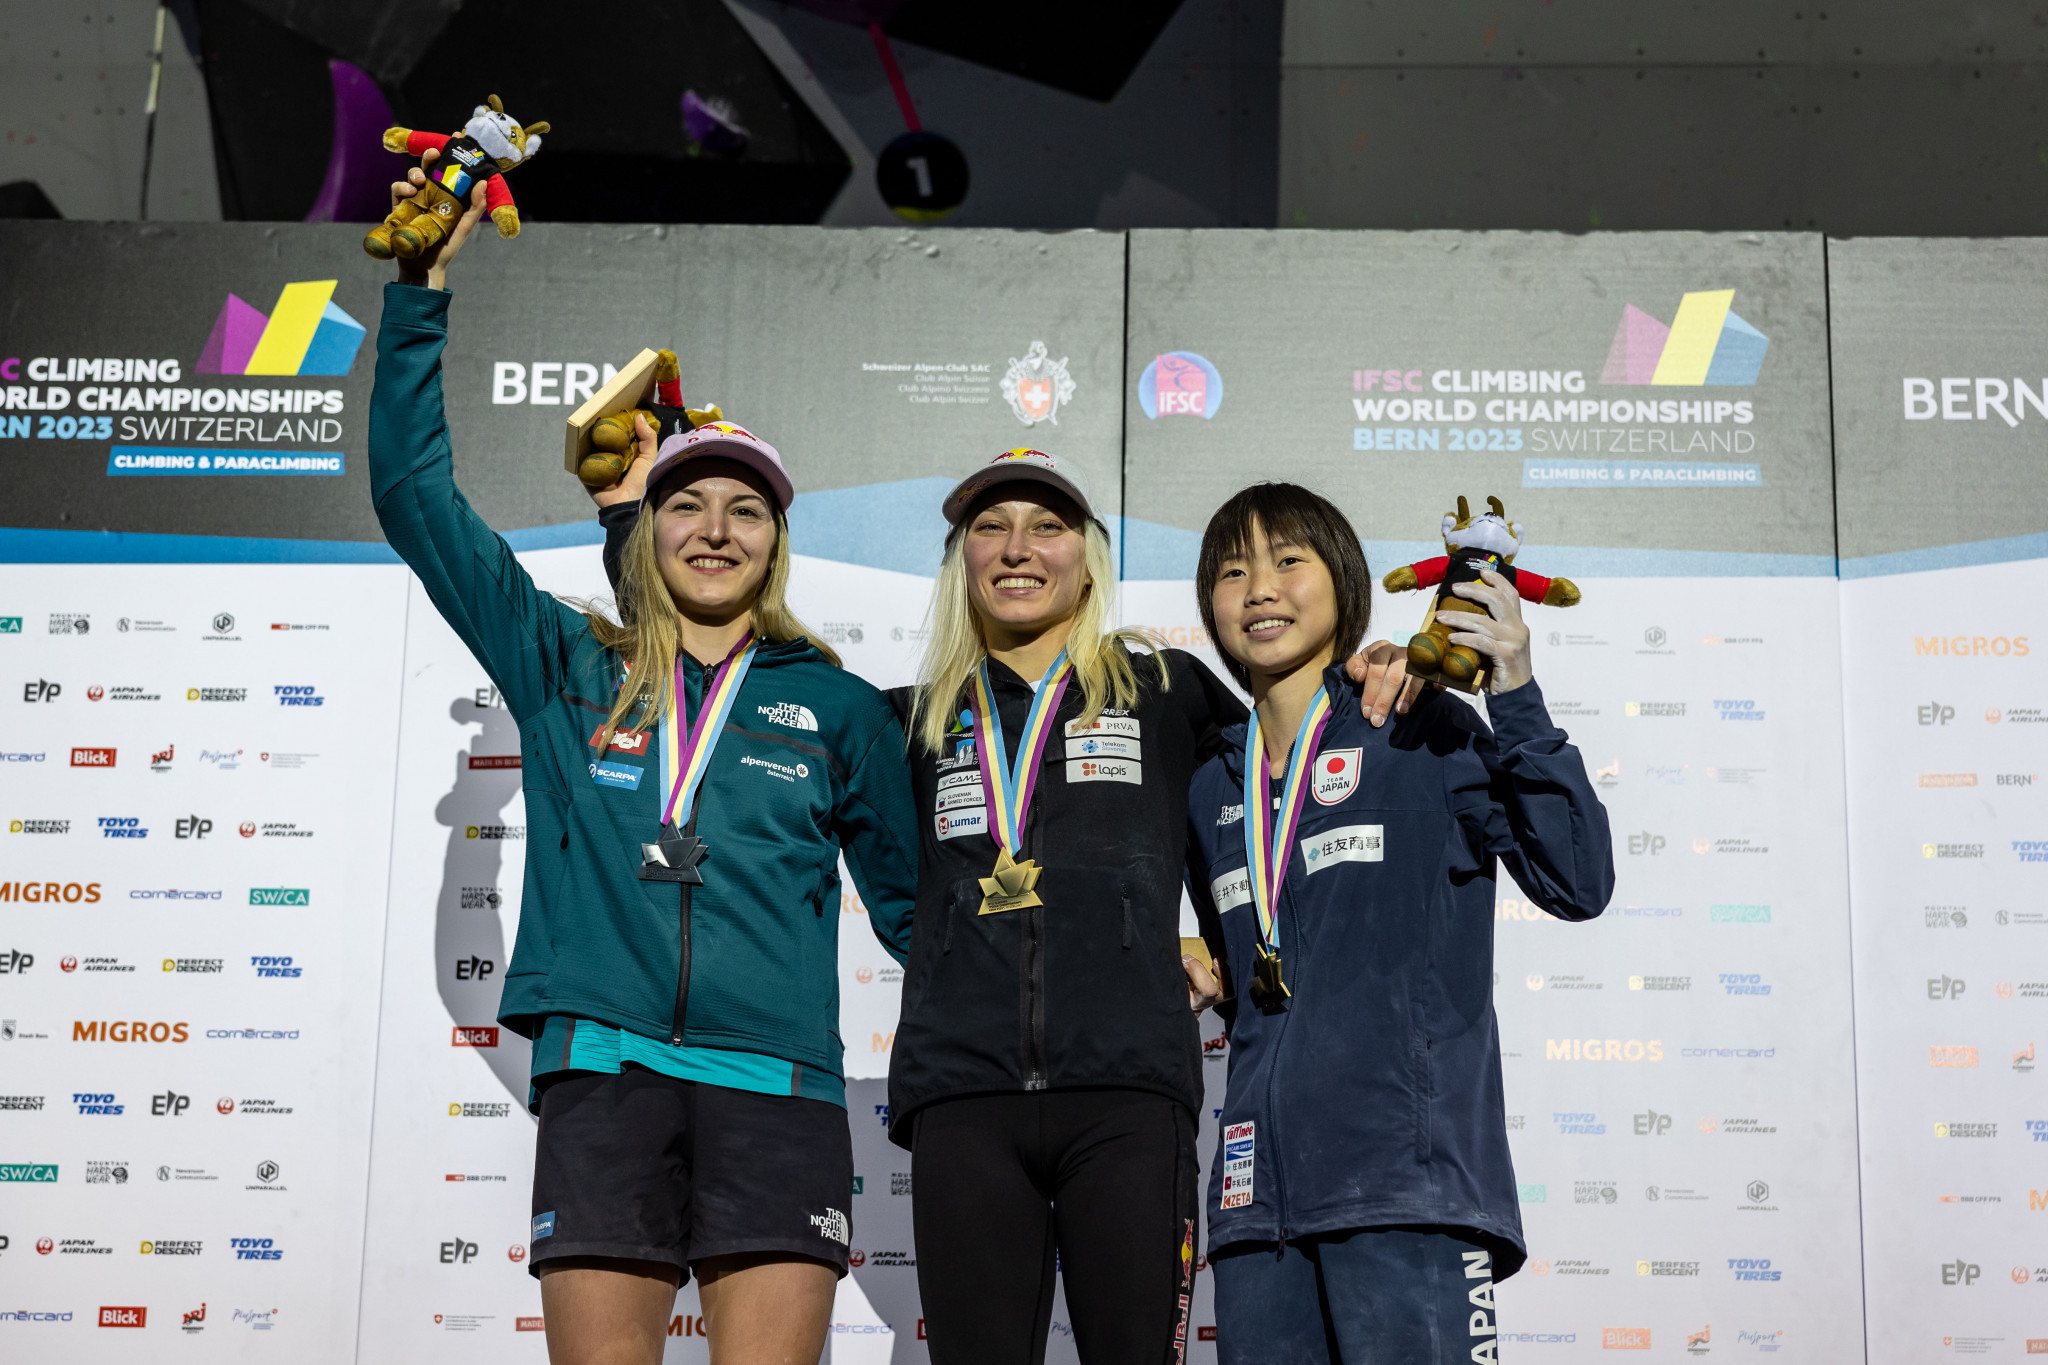 Olympic champion Janja Garnbret of Slovenia, centre, won the boulder and lead title today ©IFSC